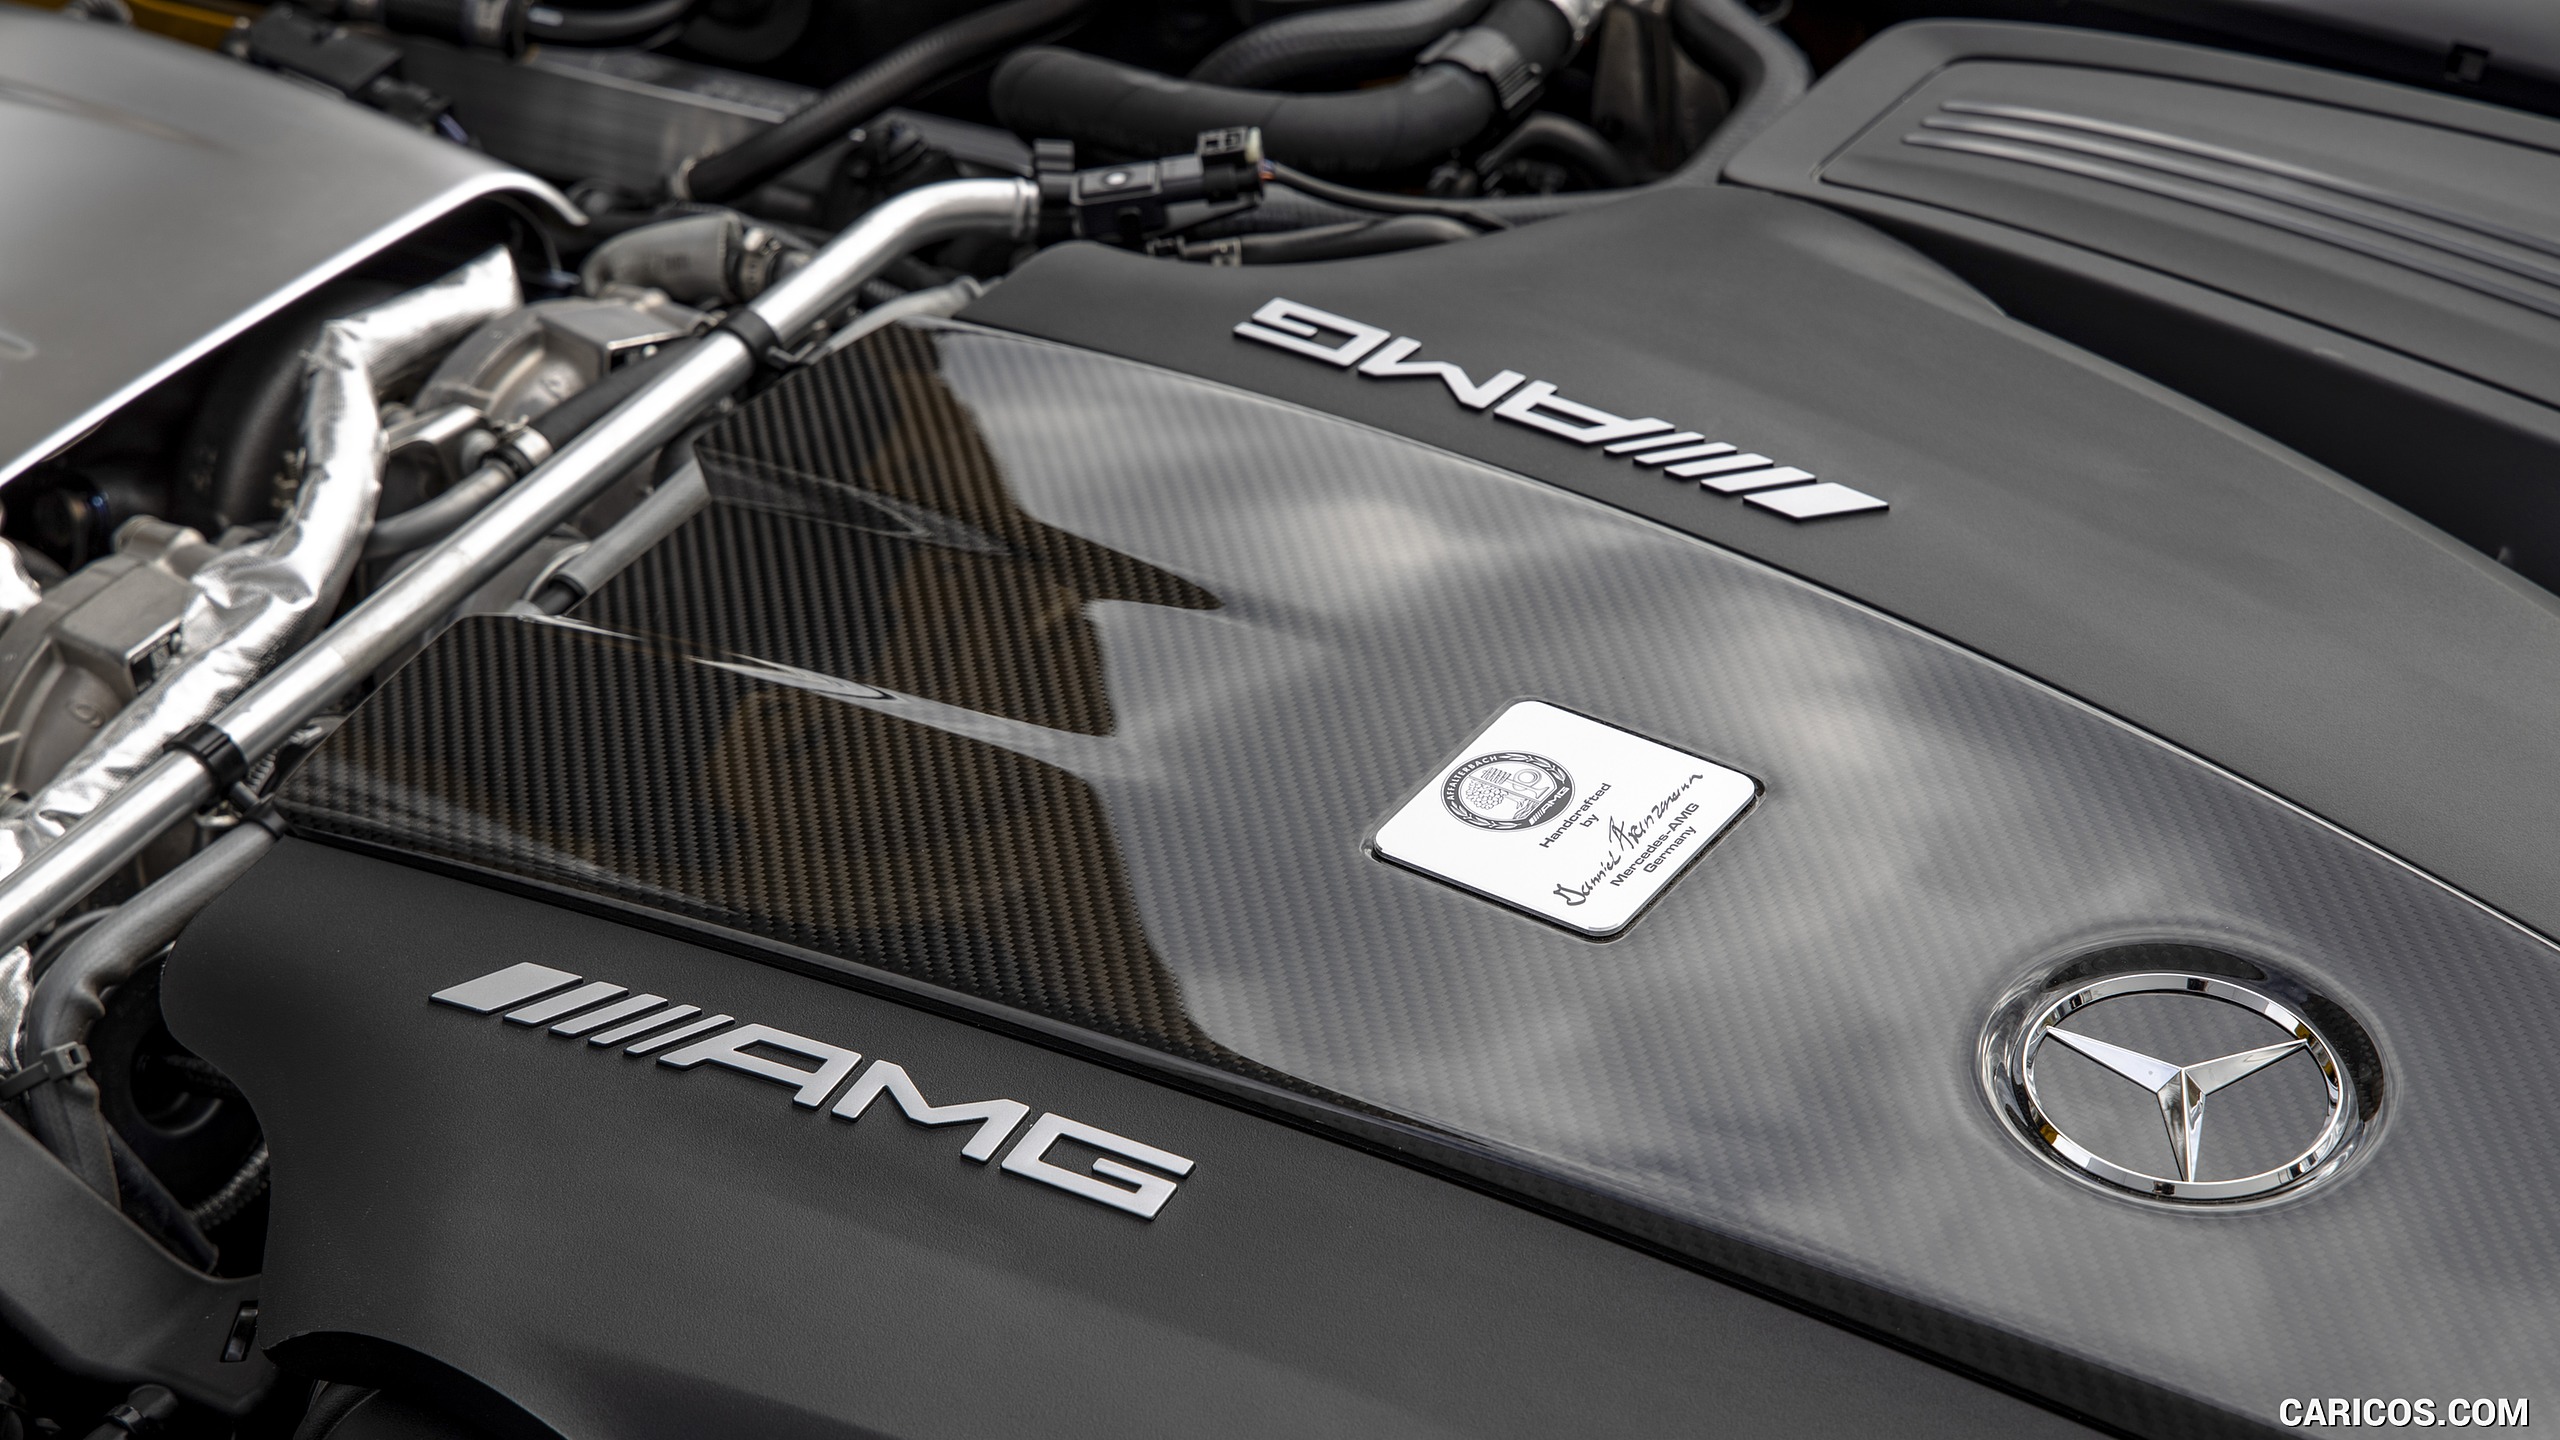 2020 Mercedes-AMG S Coupe - Engine, #85 of 328